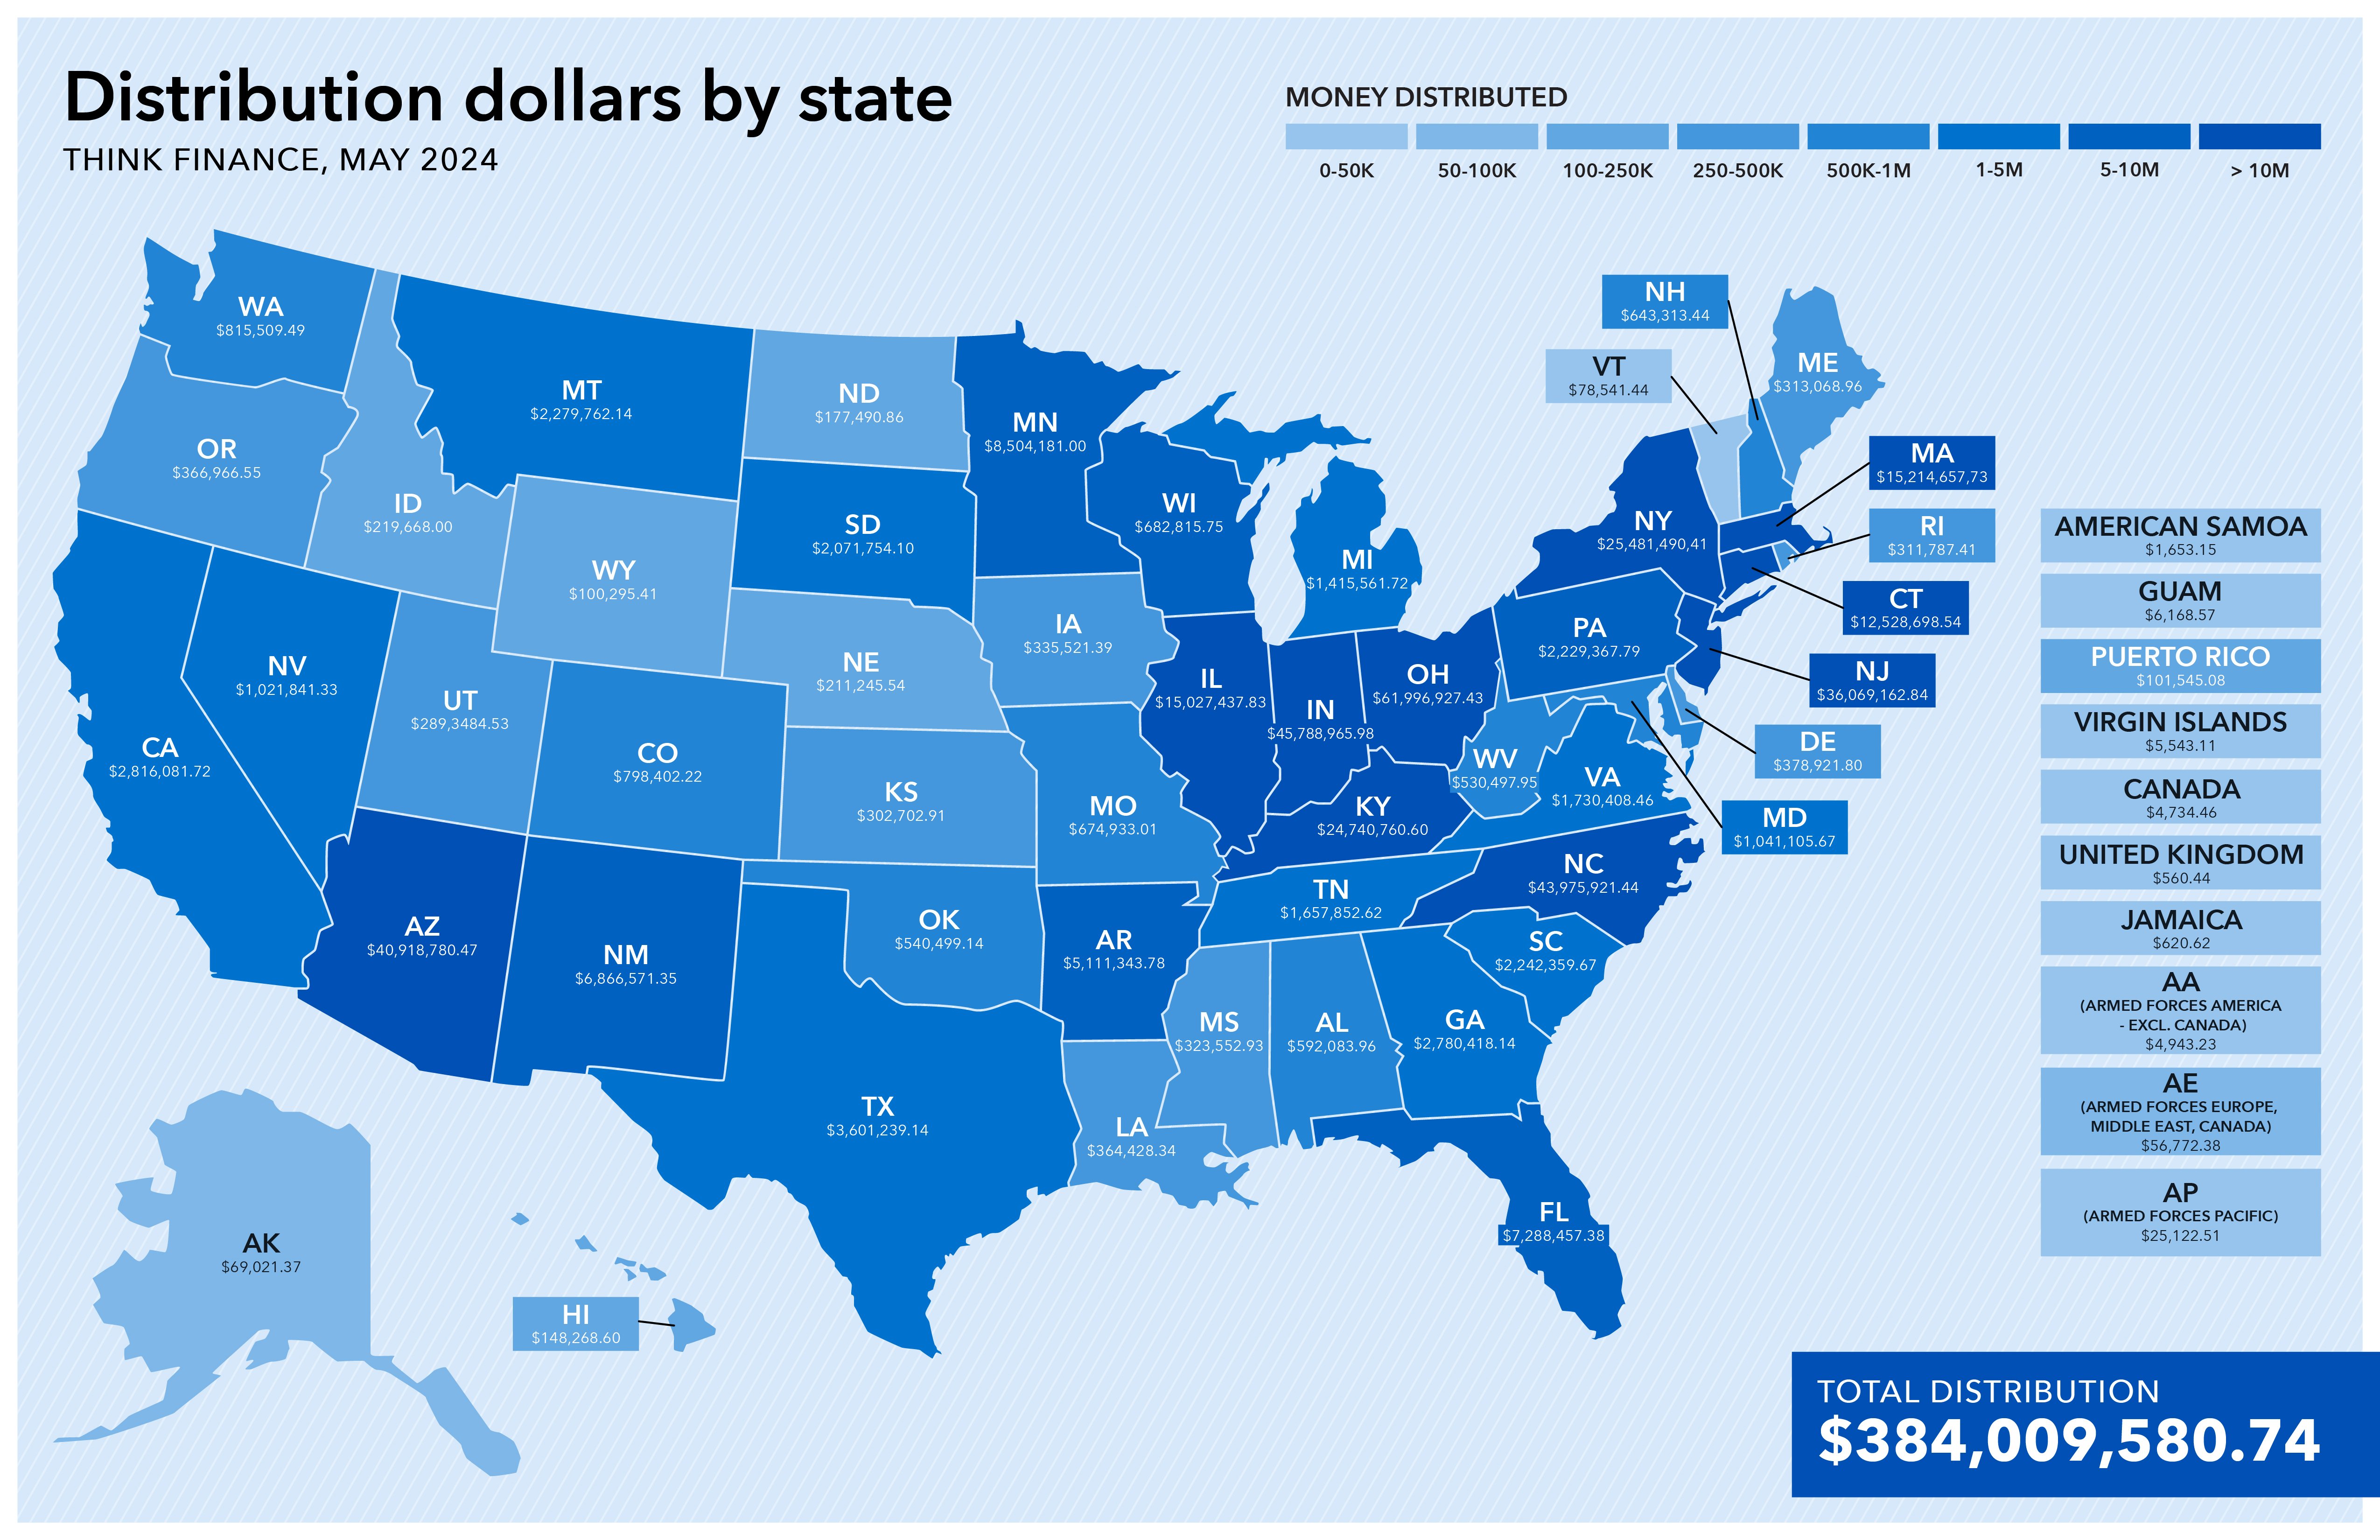 This graphic depicts a map of the United States. Each state includes the state abbreviation and the amount of money returned to consumers in that state from the CFPB’s victims relief fund. The total distribution is $384,009,580.74 to 191,672 consumers. Active-duty military living in America, not including Canada, received $4,943.23. Active-duty military living in Europe, Middle East, and Canada received $56,772.38. Consumers in Alaska received $69,021.37. Consumers in Alabama received $592,083.96. Active-duty military living in received $25,122.51. Consumers from Arkansas received $5,111,343.78.  Consumers from American Samoa received $1,653.15. Consumers from Arizona received $40,918,780.47. Consumers from California received $2,816,081.72.  Consumers from Colorado received $798,402.22. Consumers from Connecticut received $12,528,698.54.  Consumers from the District of Columbia received $158,707.18.  Consumers from Delaware received $378,921.80.  Consumers from Florida received $7,288,457.38.  Consumers from Georgia received $2,780,418.14.  Consumers from Guam received $6,168.57.  Consumers from Hawaii received $148,268.60.  Consumers from Iowa received $335,521.39.  Consumers from Idaho received $219,668.00.  Consumers from Illinois received $15,027,437.83.  Consumers from Indiana received $45,788,965.98.  Consumers from Kansas received $302,782.91.  Consumers from Kentucky received $24,740,760.60.  Consumers from Louisiana received $364,428.34.  Consumers from Massachusetts received $15,214,657.73.  Consumers from Maryland received $1,041,105.67.  Consumers from Maine received $313,068.96.  Consumers from Michigan received $1,415,561.72.  Consumers from Minnesota received $8,504,181.00.  Consumers from Missouri received $674,933.01.  Consumers from Mississippi received $323,552.93.  Consumers from Montana received $2,279,762.14.  Consumers from North Carolina received $43,975,921.44.  Consumers from North Dakota received $177,490.86.  Consumers from Nebraska received $211,245.54.  Consumers from New Hampshire received $643,313.44.  Consumers from New Jersey received $36,069,162.84.  Consumers from New Mexico received $6,866,571.35.  Consumers from Nevada received $1,021,841.33.  Consumers from New York received $25,481,490.41.  Consumers from Ohio received $61,996,927.43.  Consumers from Oklahoma received $540,499.14.  Consumers from Oregon received $366,966.55.  Consumers from Pennsylvania received $2,229,367.79.  Consumers from Puerto Rico received $101,545.08.  Consumers from Rhode Island received $311,787.14.  Consumers from South Carolina received $2,242,359.67.  Consumers from South Dakota received $2,071,754.10.  Consumers from Tennessee received $1,657,852.62.  Consumers from Texas received $3,601,239.14.  Consumers from Utah received $289,484.53.  Consumers from Virginia received $1,703,408.46.  Consumers from the Virgin Islands received $5,543.11.  Consumers from Vermont received $78,541.44.  Consumers from Washington received $815,509.49.  Consumers from Wisconsin received $682,815.75. Consumers from West Virginia received $530,497.95. Consumers from Wyoming received $100,295.41. Consumers from Jamaica received $620.62. Consumers from the United Kingdom received $560.44. Consumers from Canada received $4,734.46.